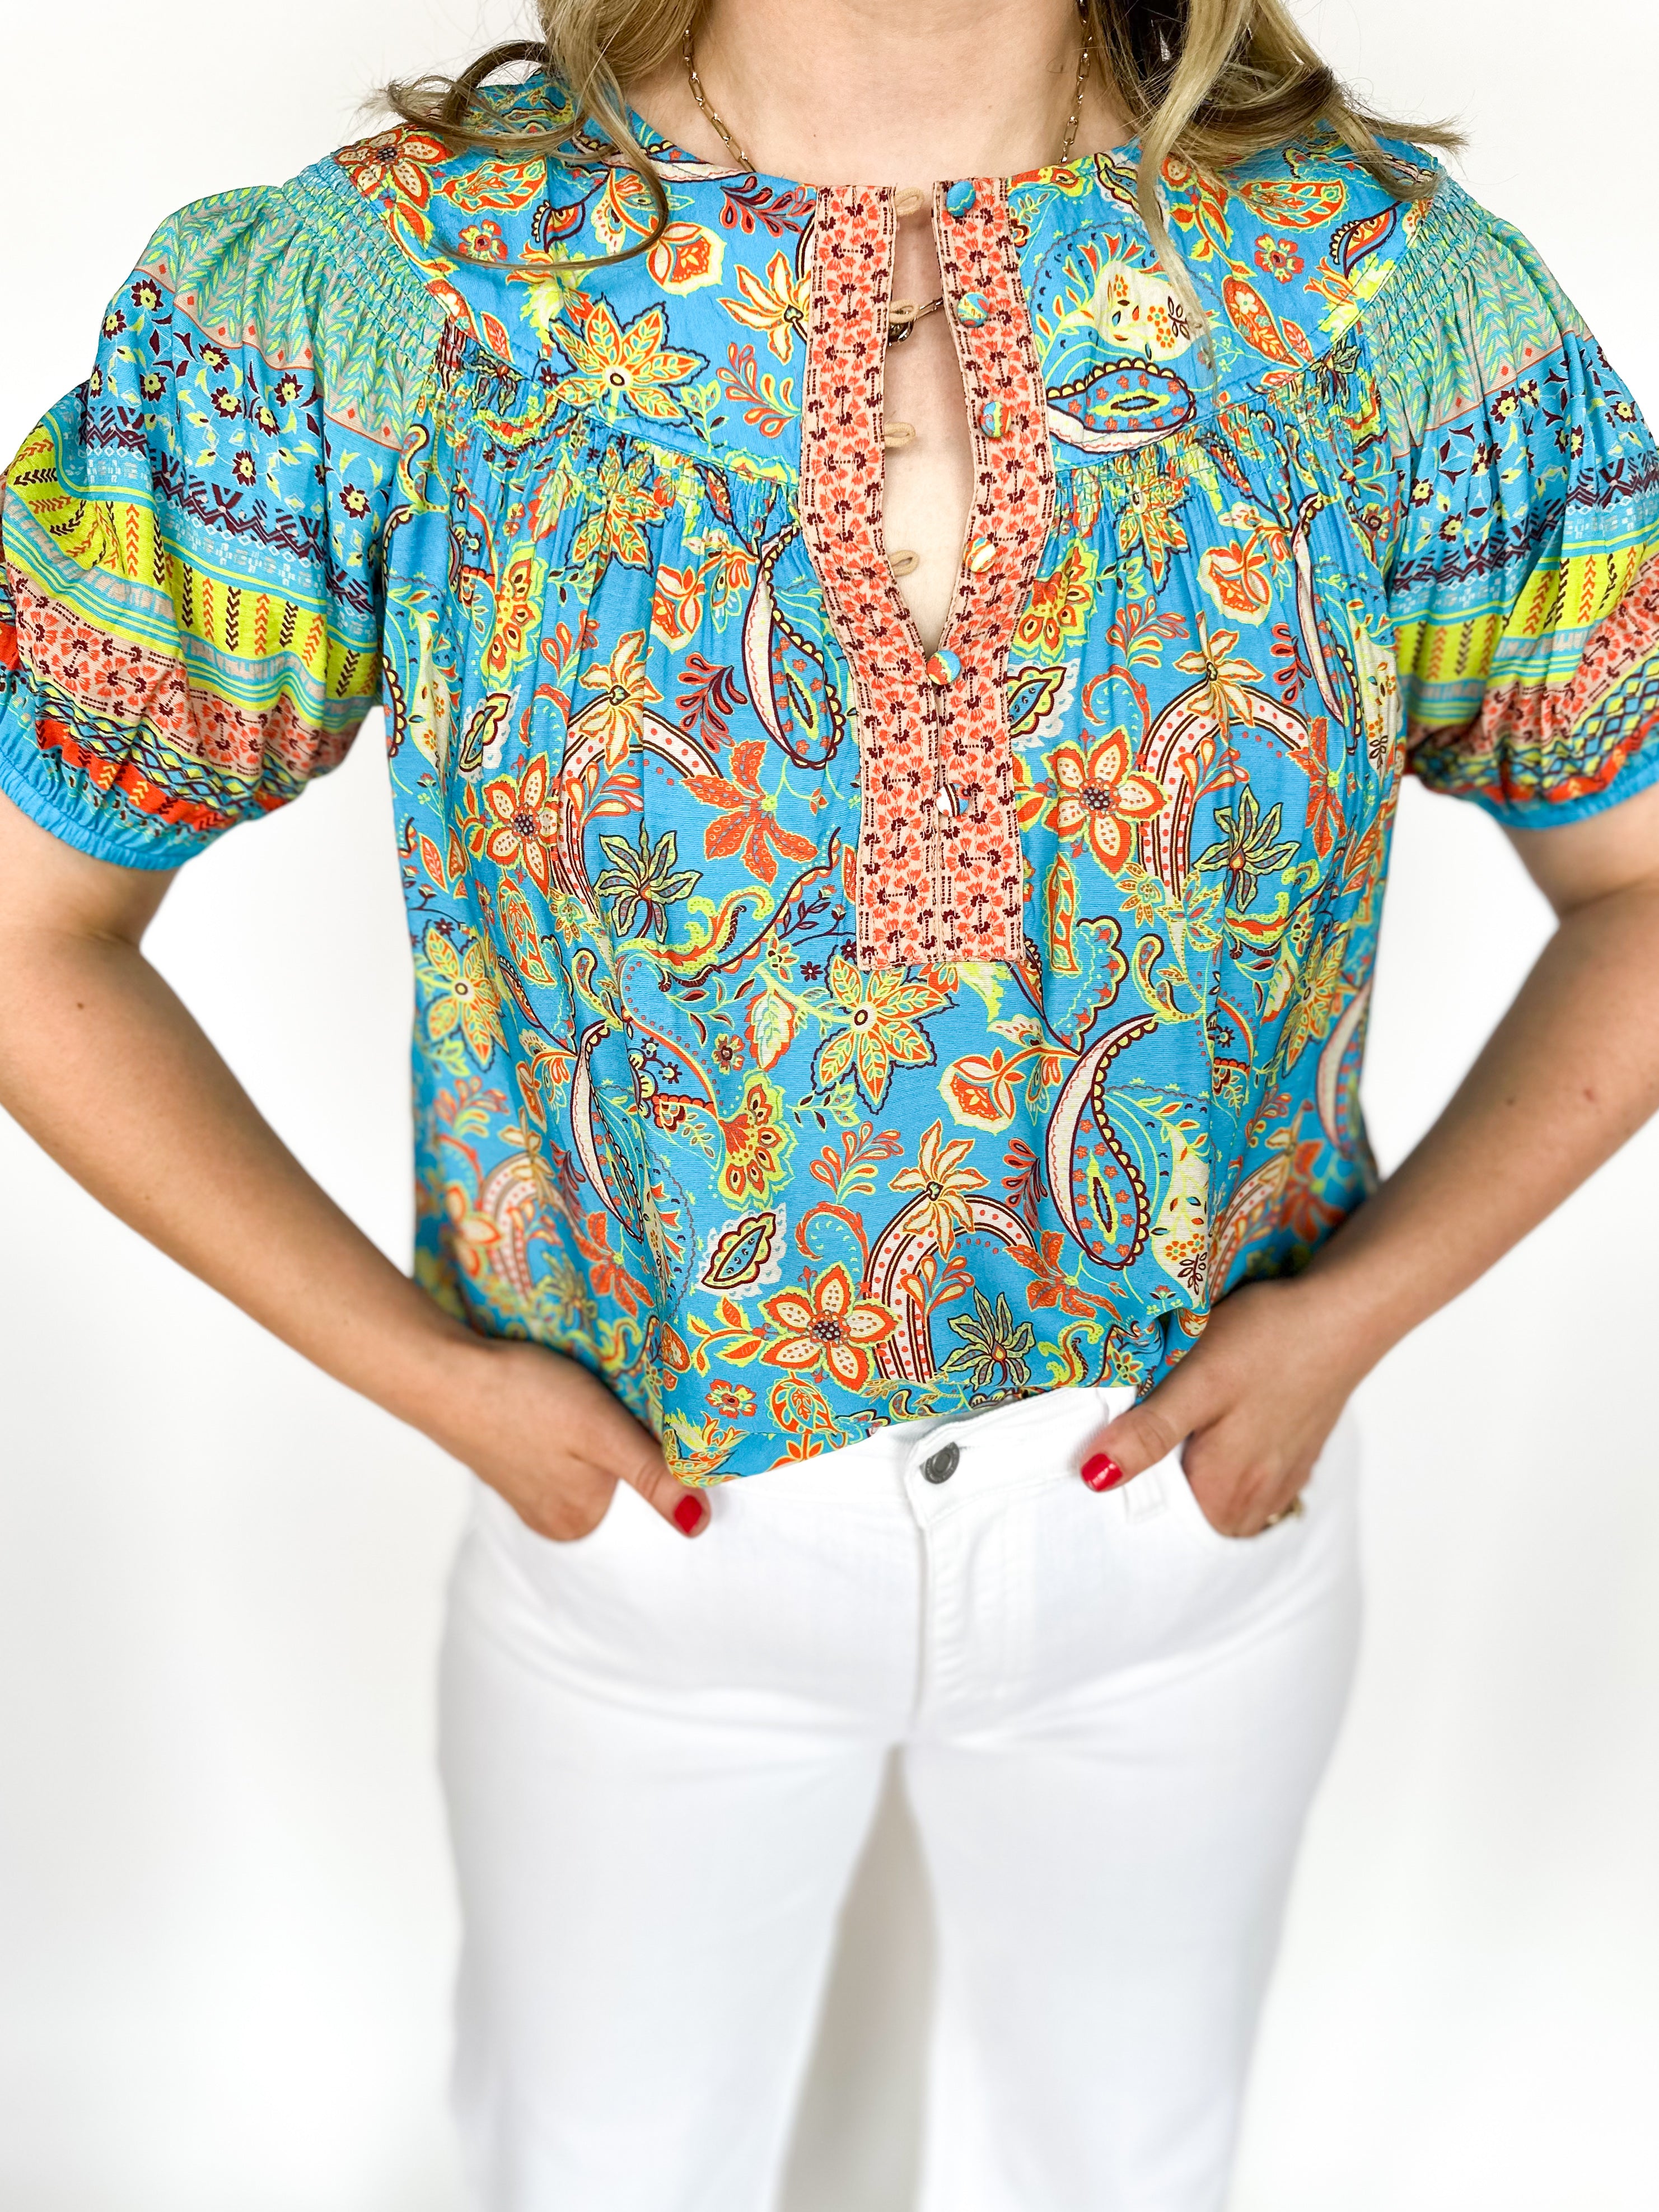 Paisley Border Print Blouse-200 Fashion Blouses-CURRENT AIR CLOTHING-July & June Women's Fashion Boutique Located in San Antonio, Texas